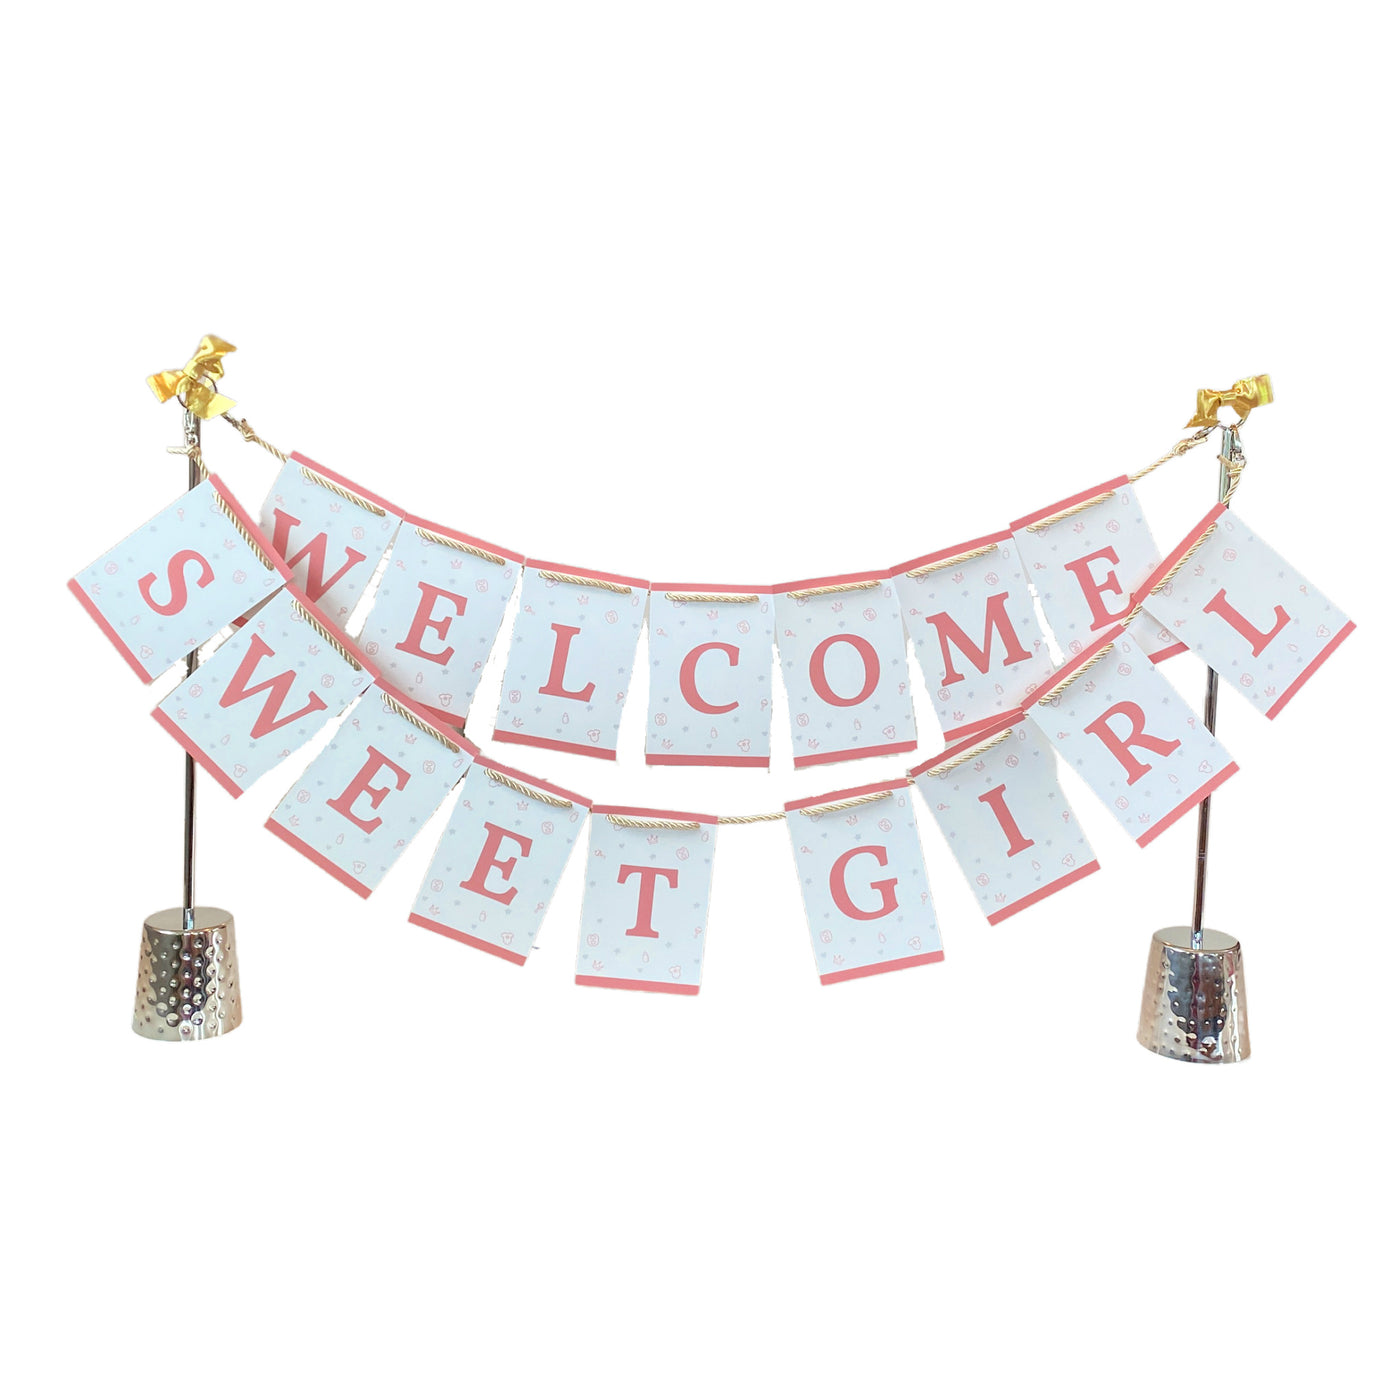 Baby Shower Gift Bundle :  5 Banners + Stand